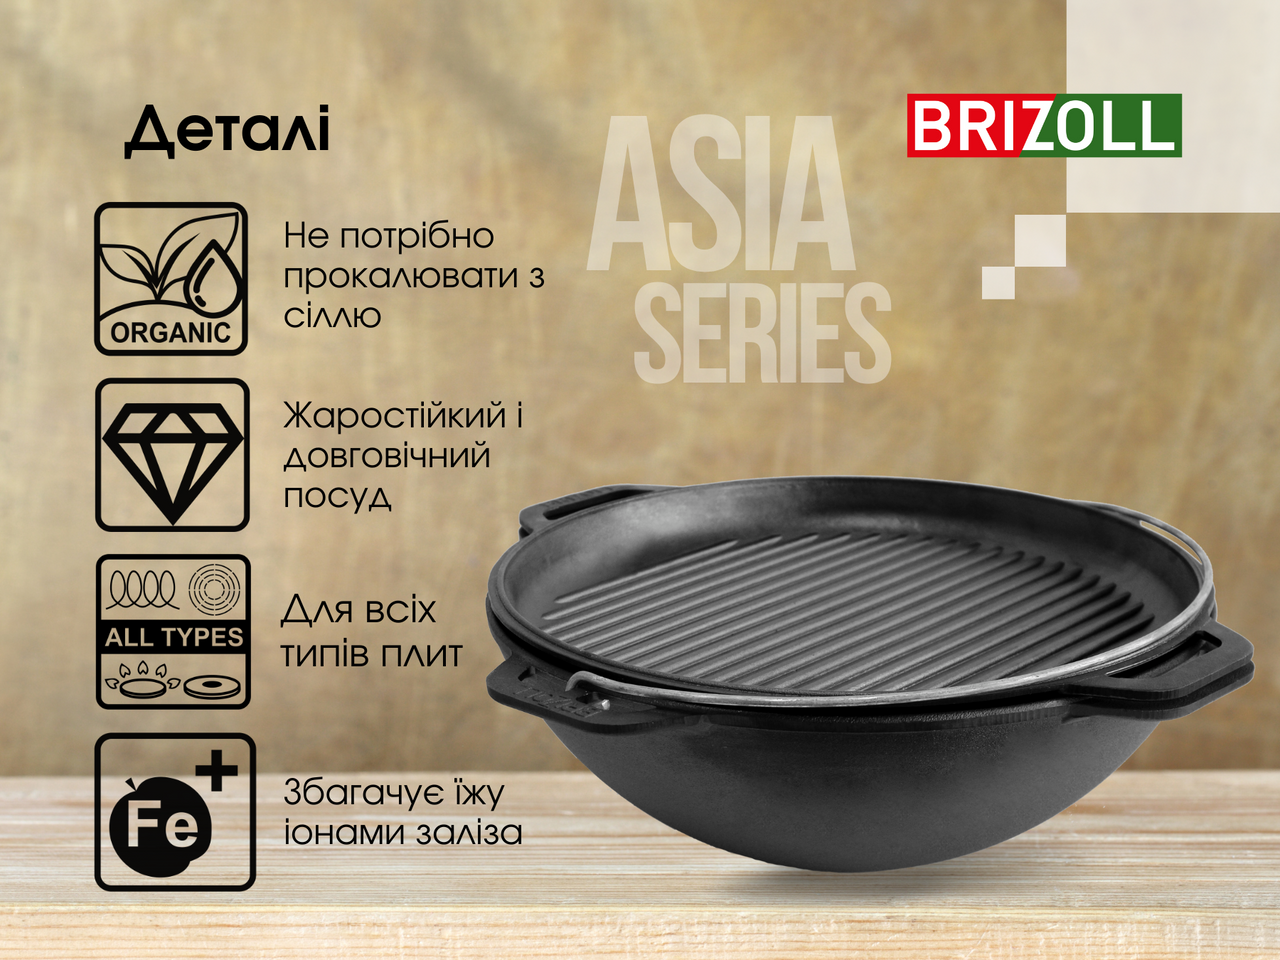 Cast iron asian cauldron 12 L WITH A GRILL LID-FRYING PAN and a bag